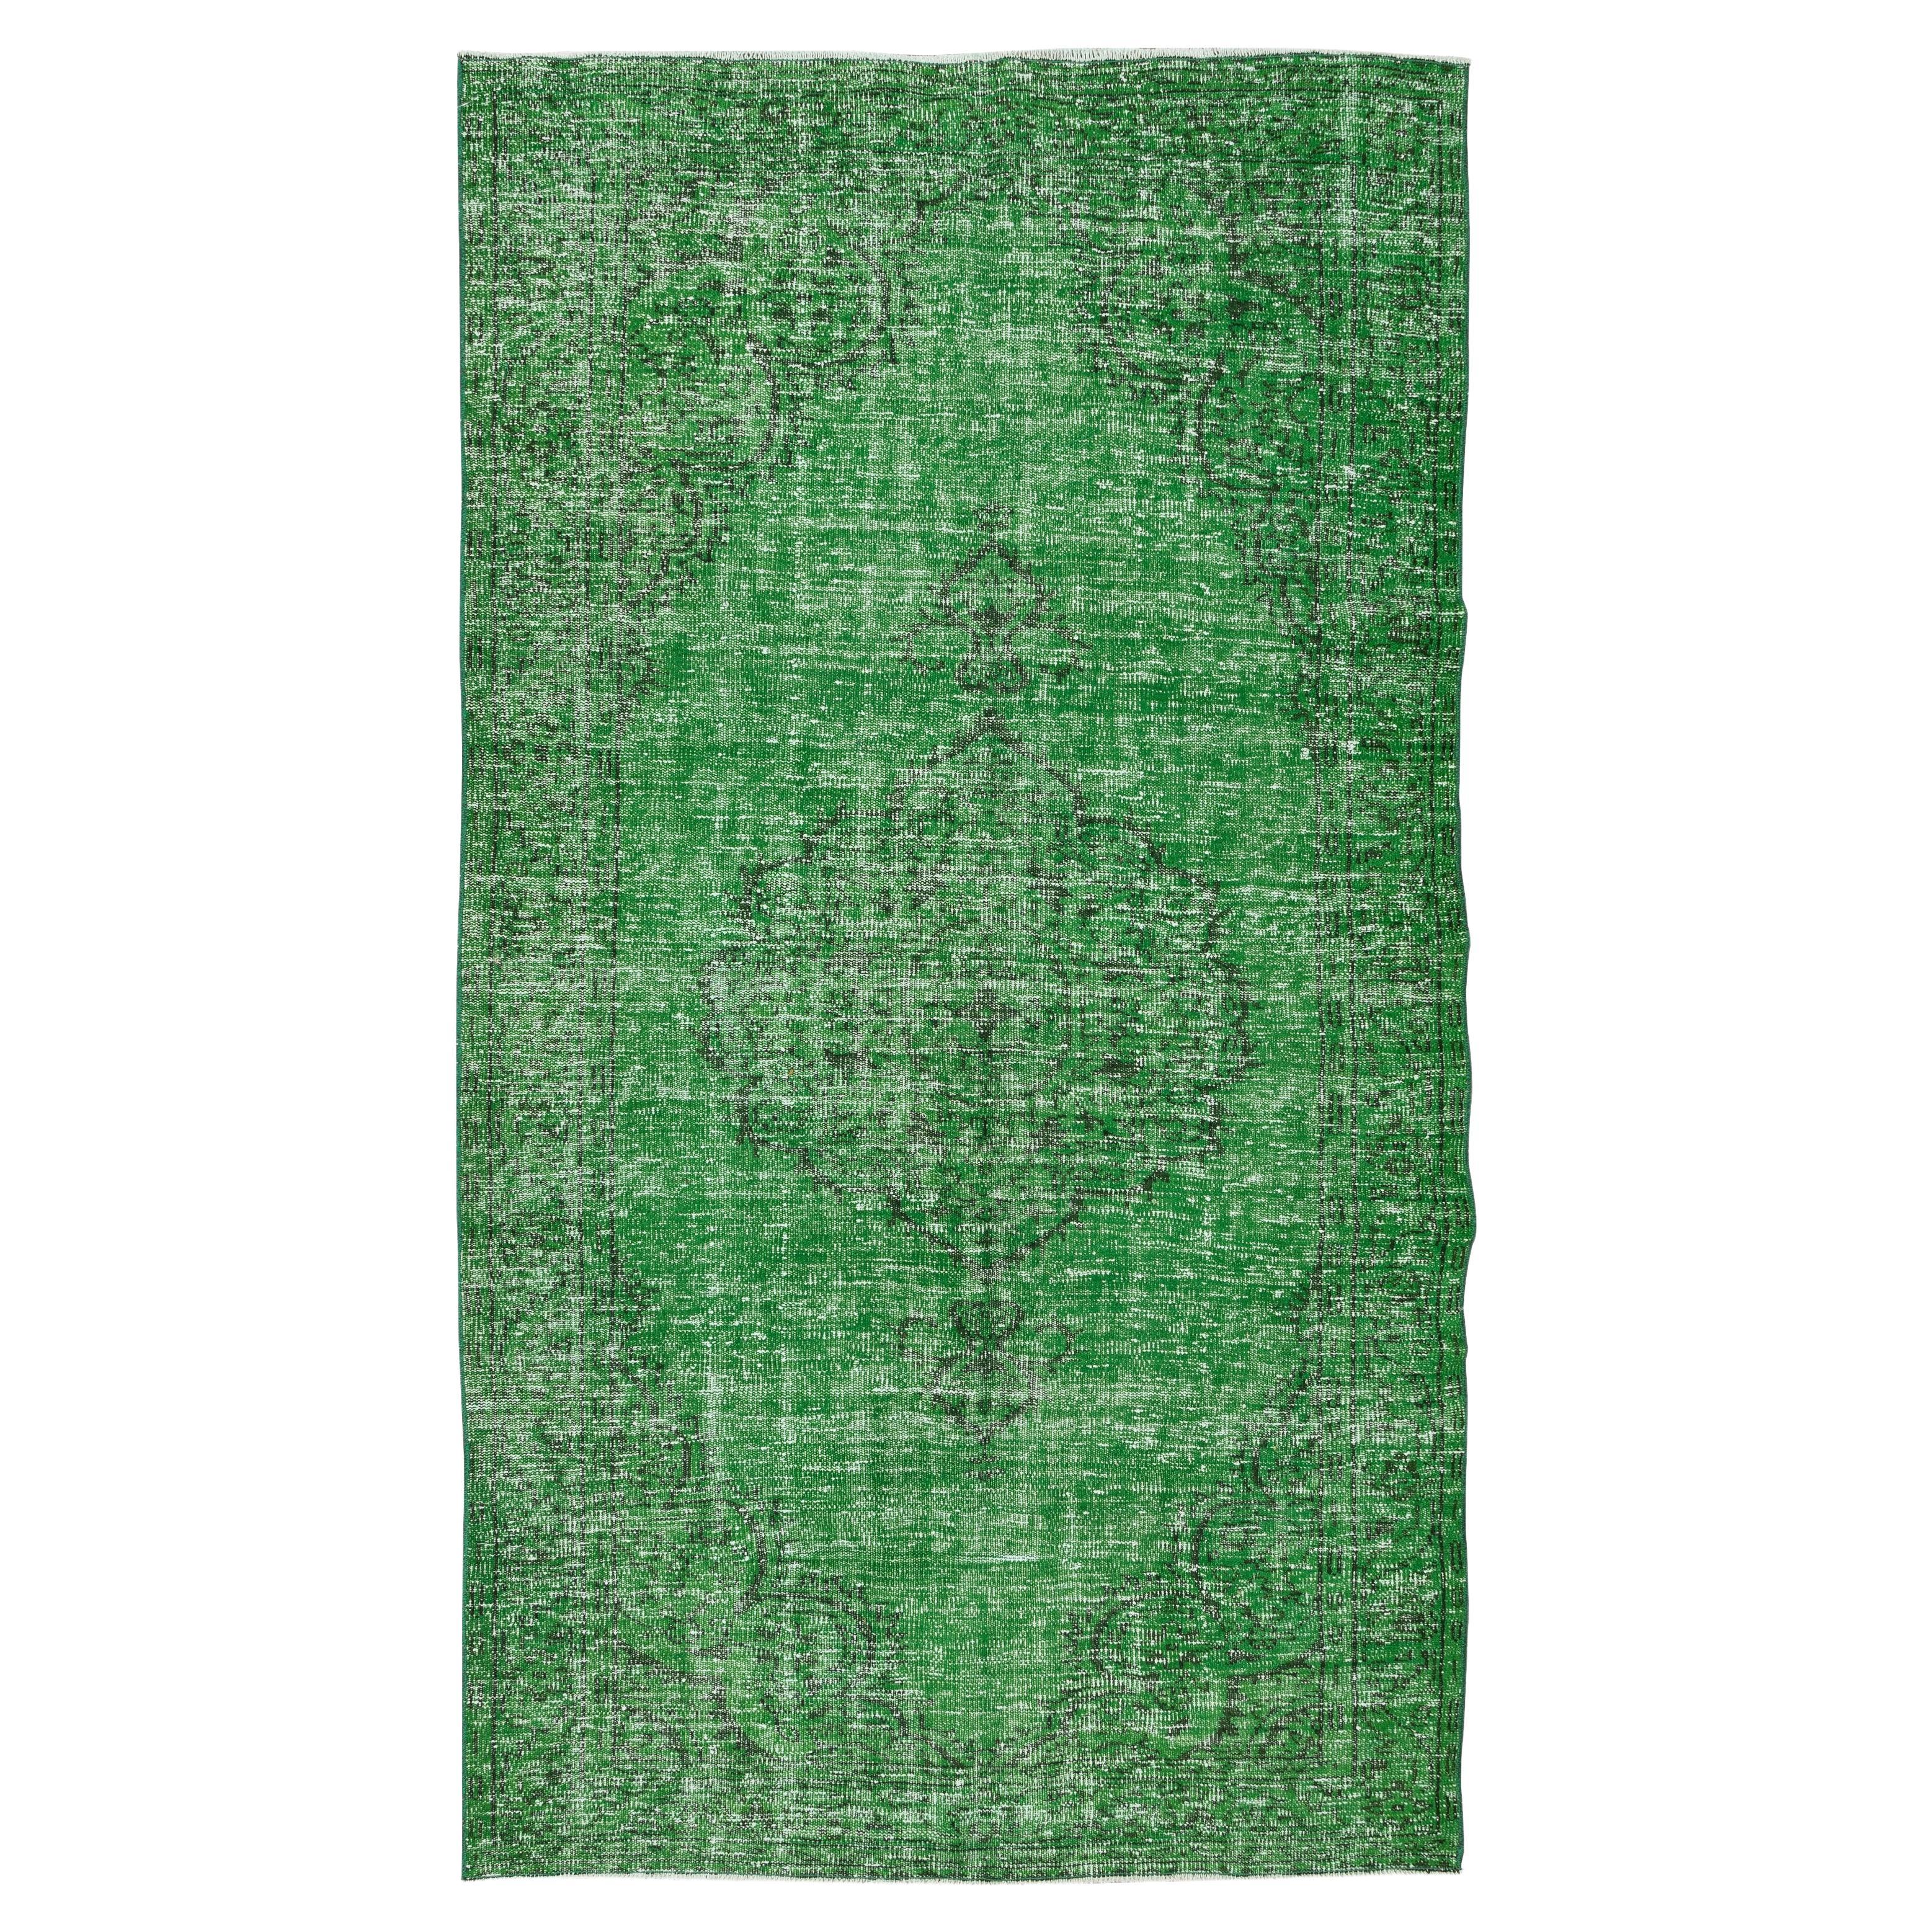 5.2x9.3 Ft Vintage Anatolian Area Rug, Green Handmade Contemporary Wool Carpet For Sale